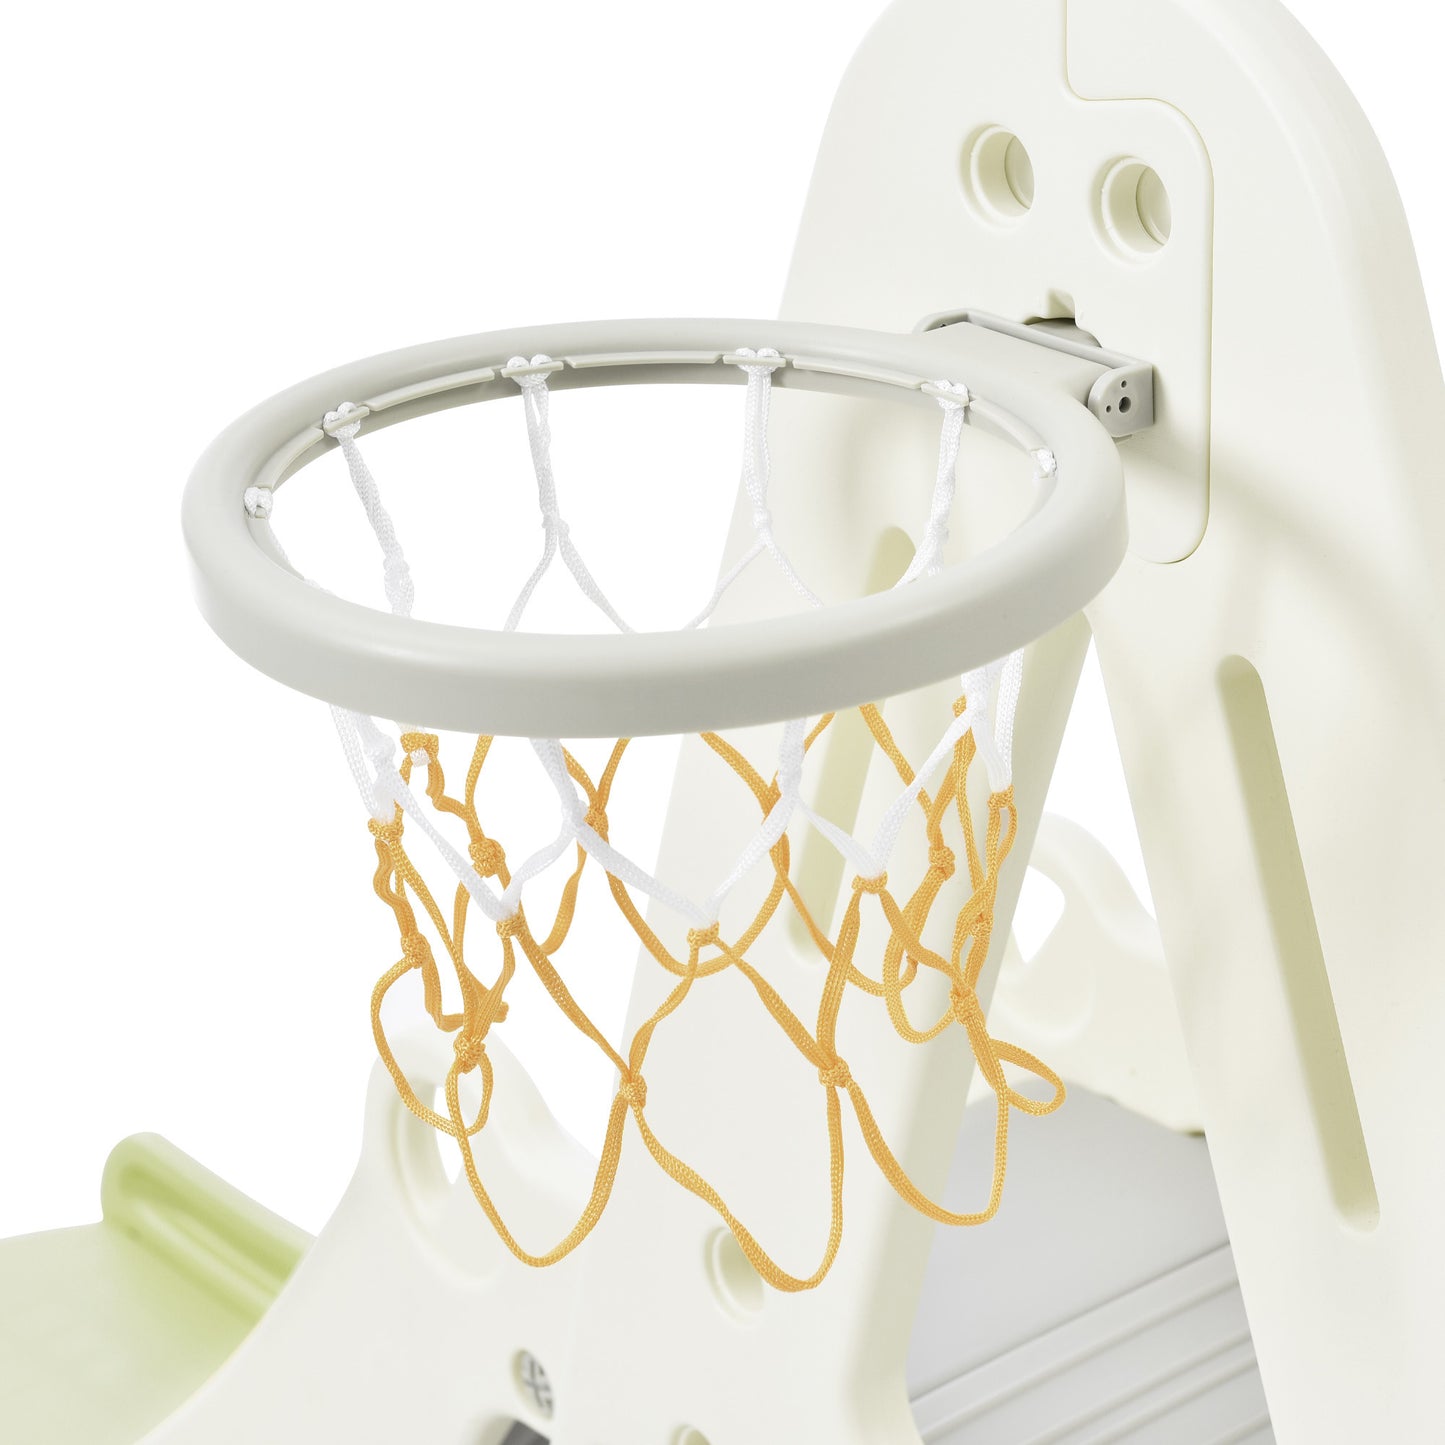 5-in-1 Toddler Climber Basketball Hoop Set - Kids Playground Climber Playset with Tunnel, Climber, Whiteboard, and Toy Building Block Baseplates - Combination for Babies - White